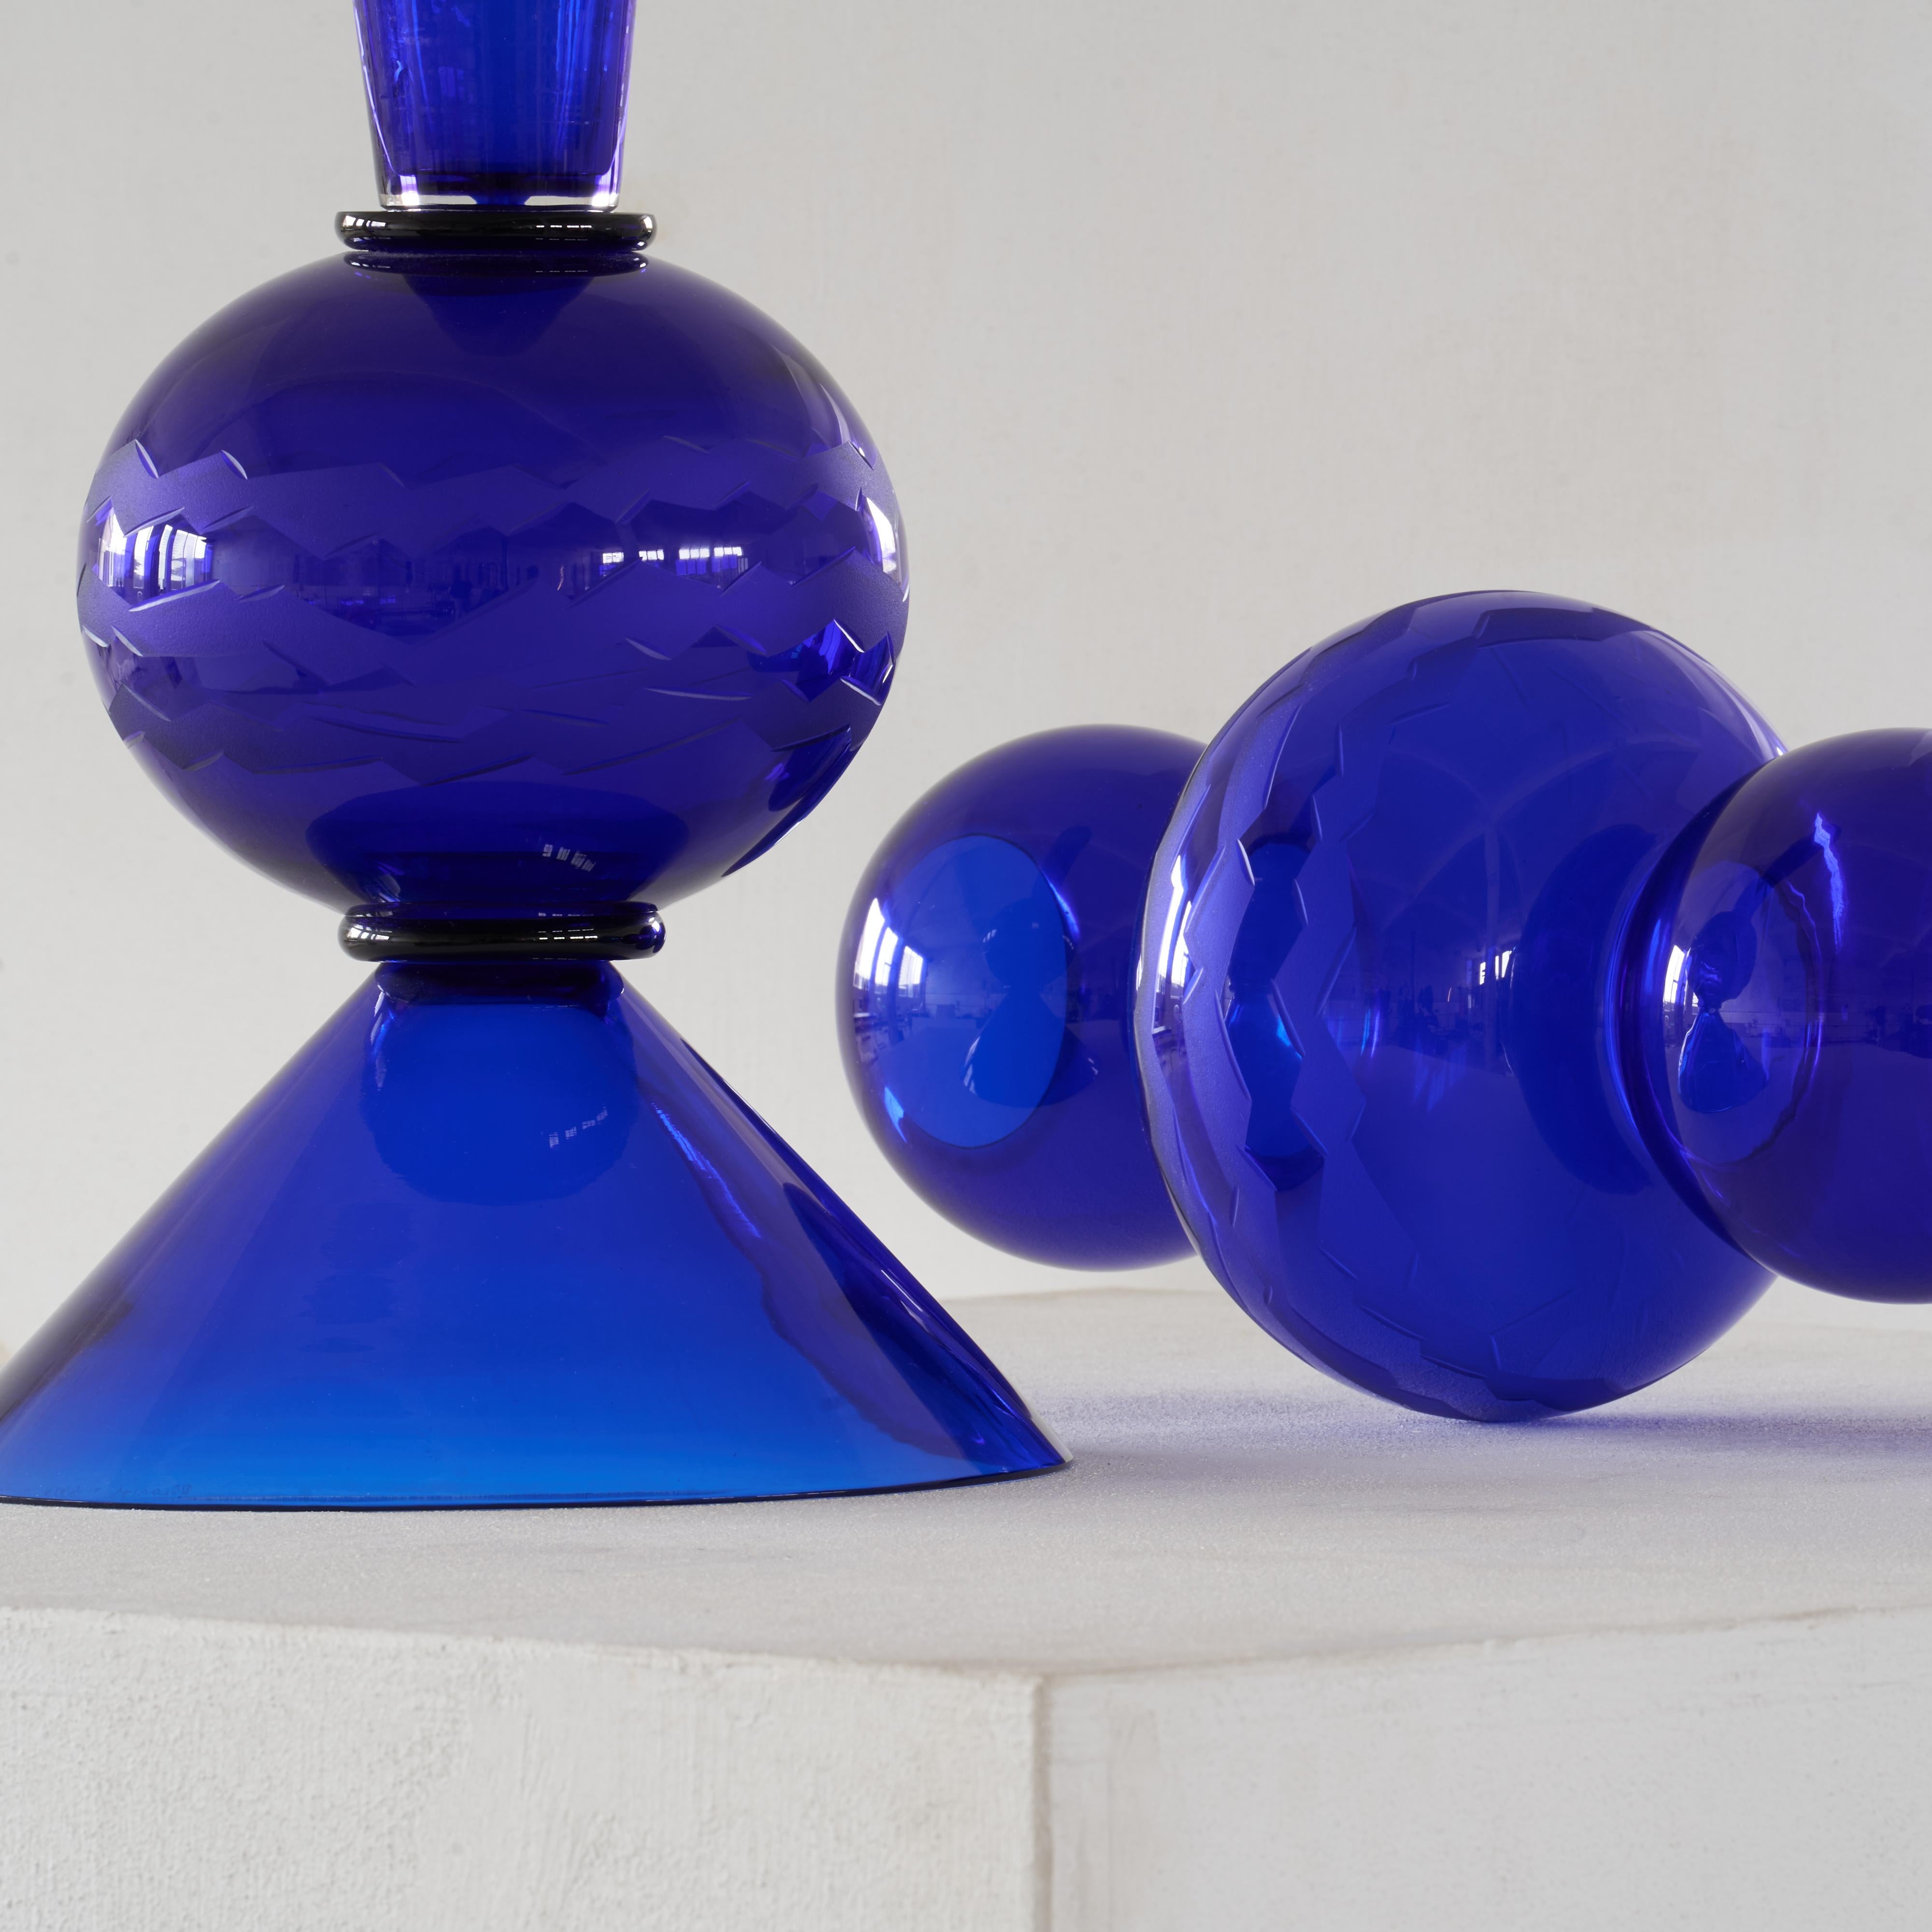 Italian Pair of Very Large Memphis Glass Objects by Matteo Thun for Tiffany & Co. 1987 For Sale